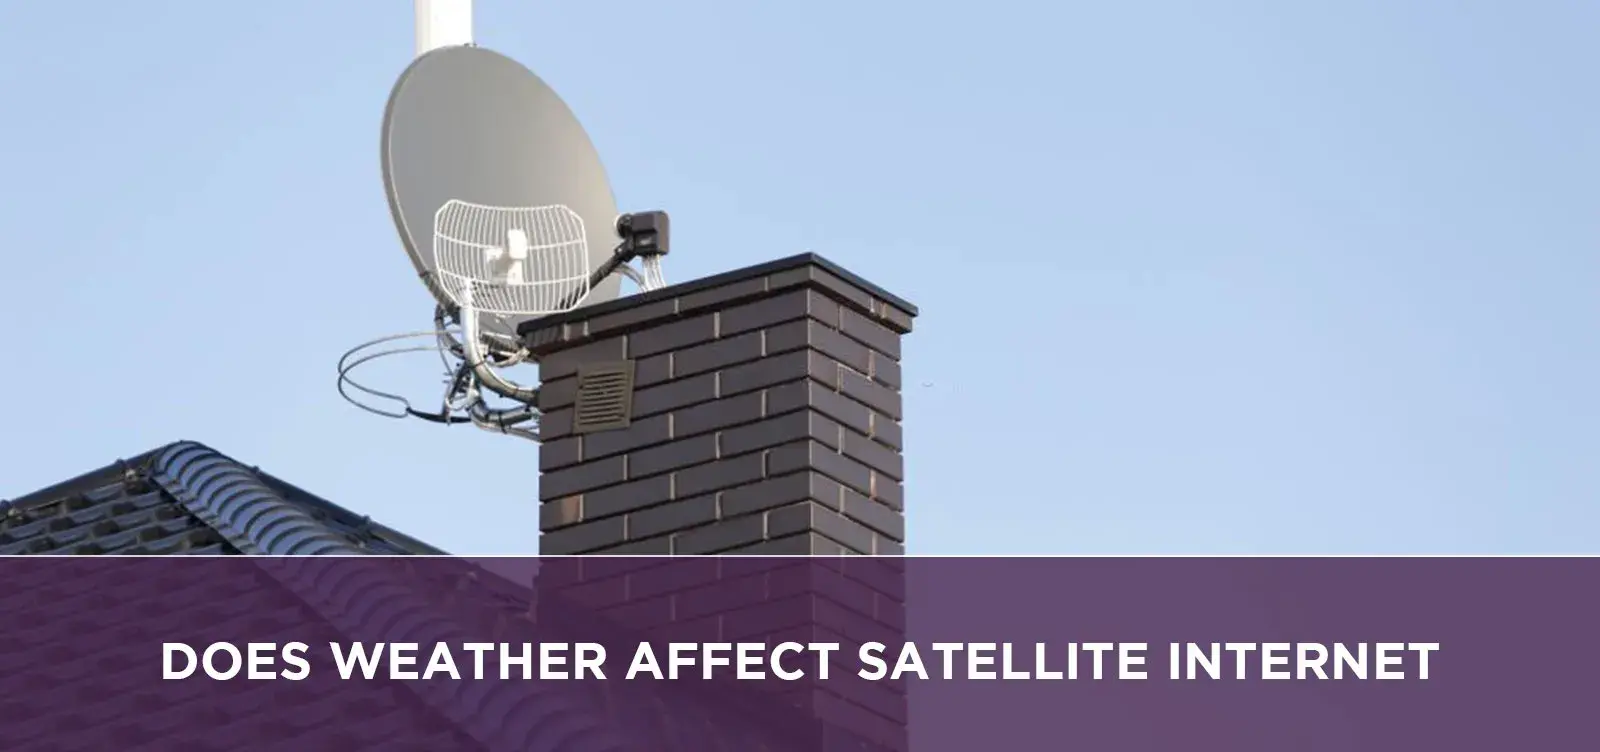 Does Weather Affect Satellite Internet?